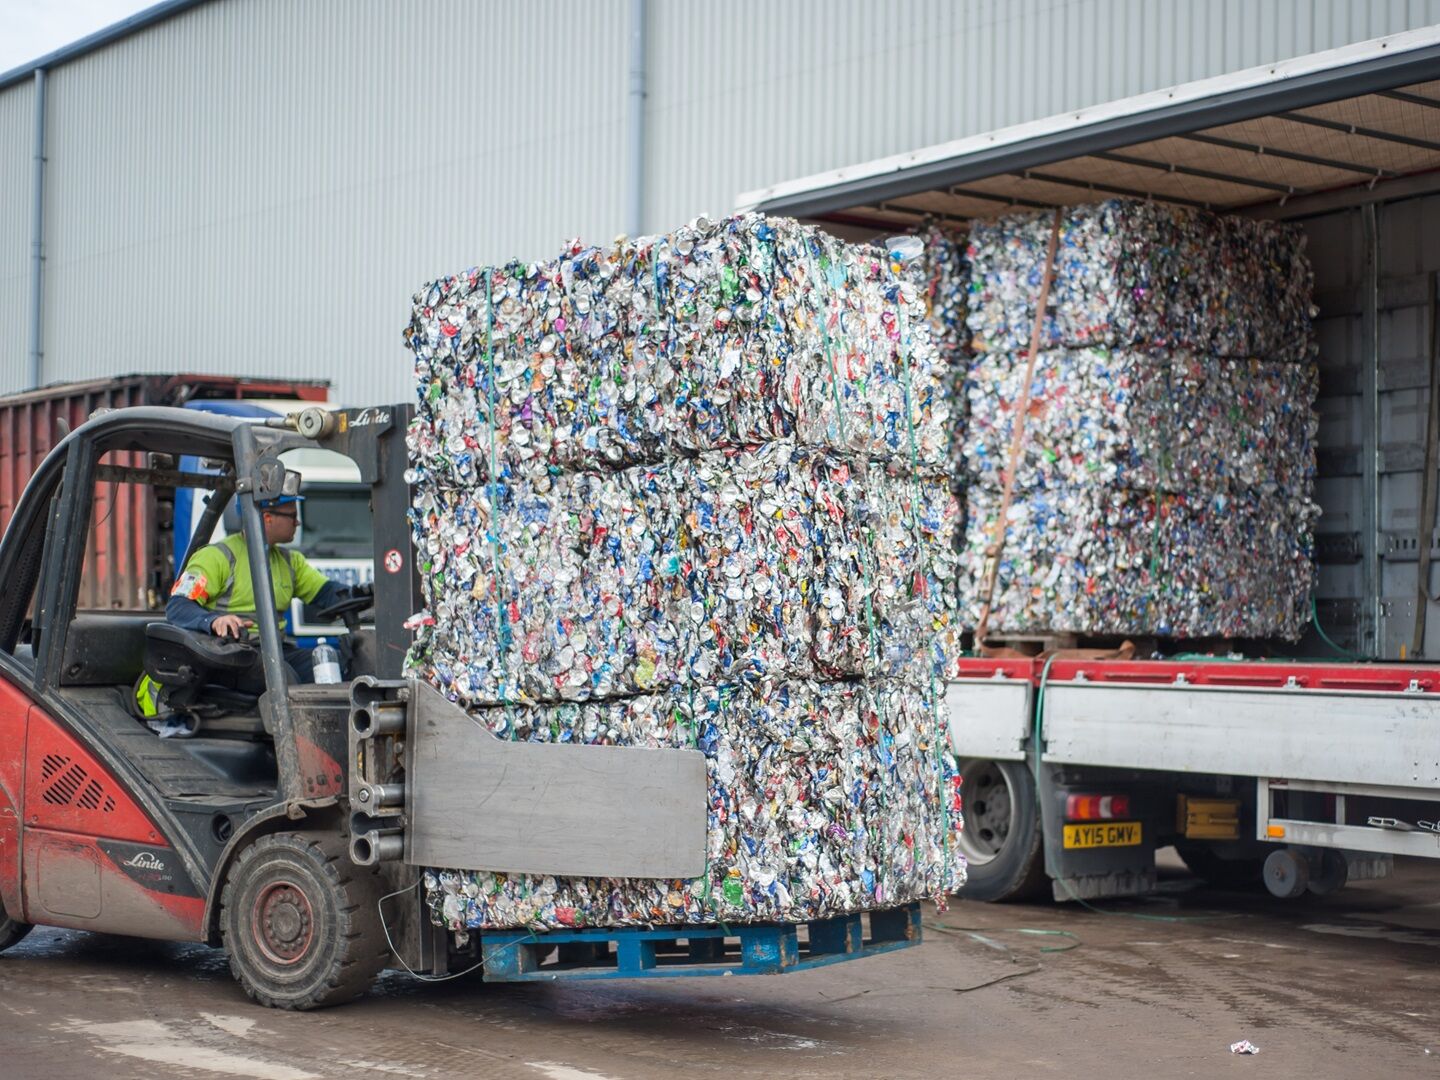 Less than half of manufacturing and production SMEs use a recycling service